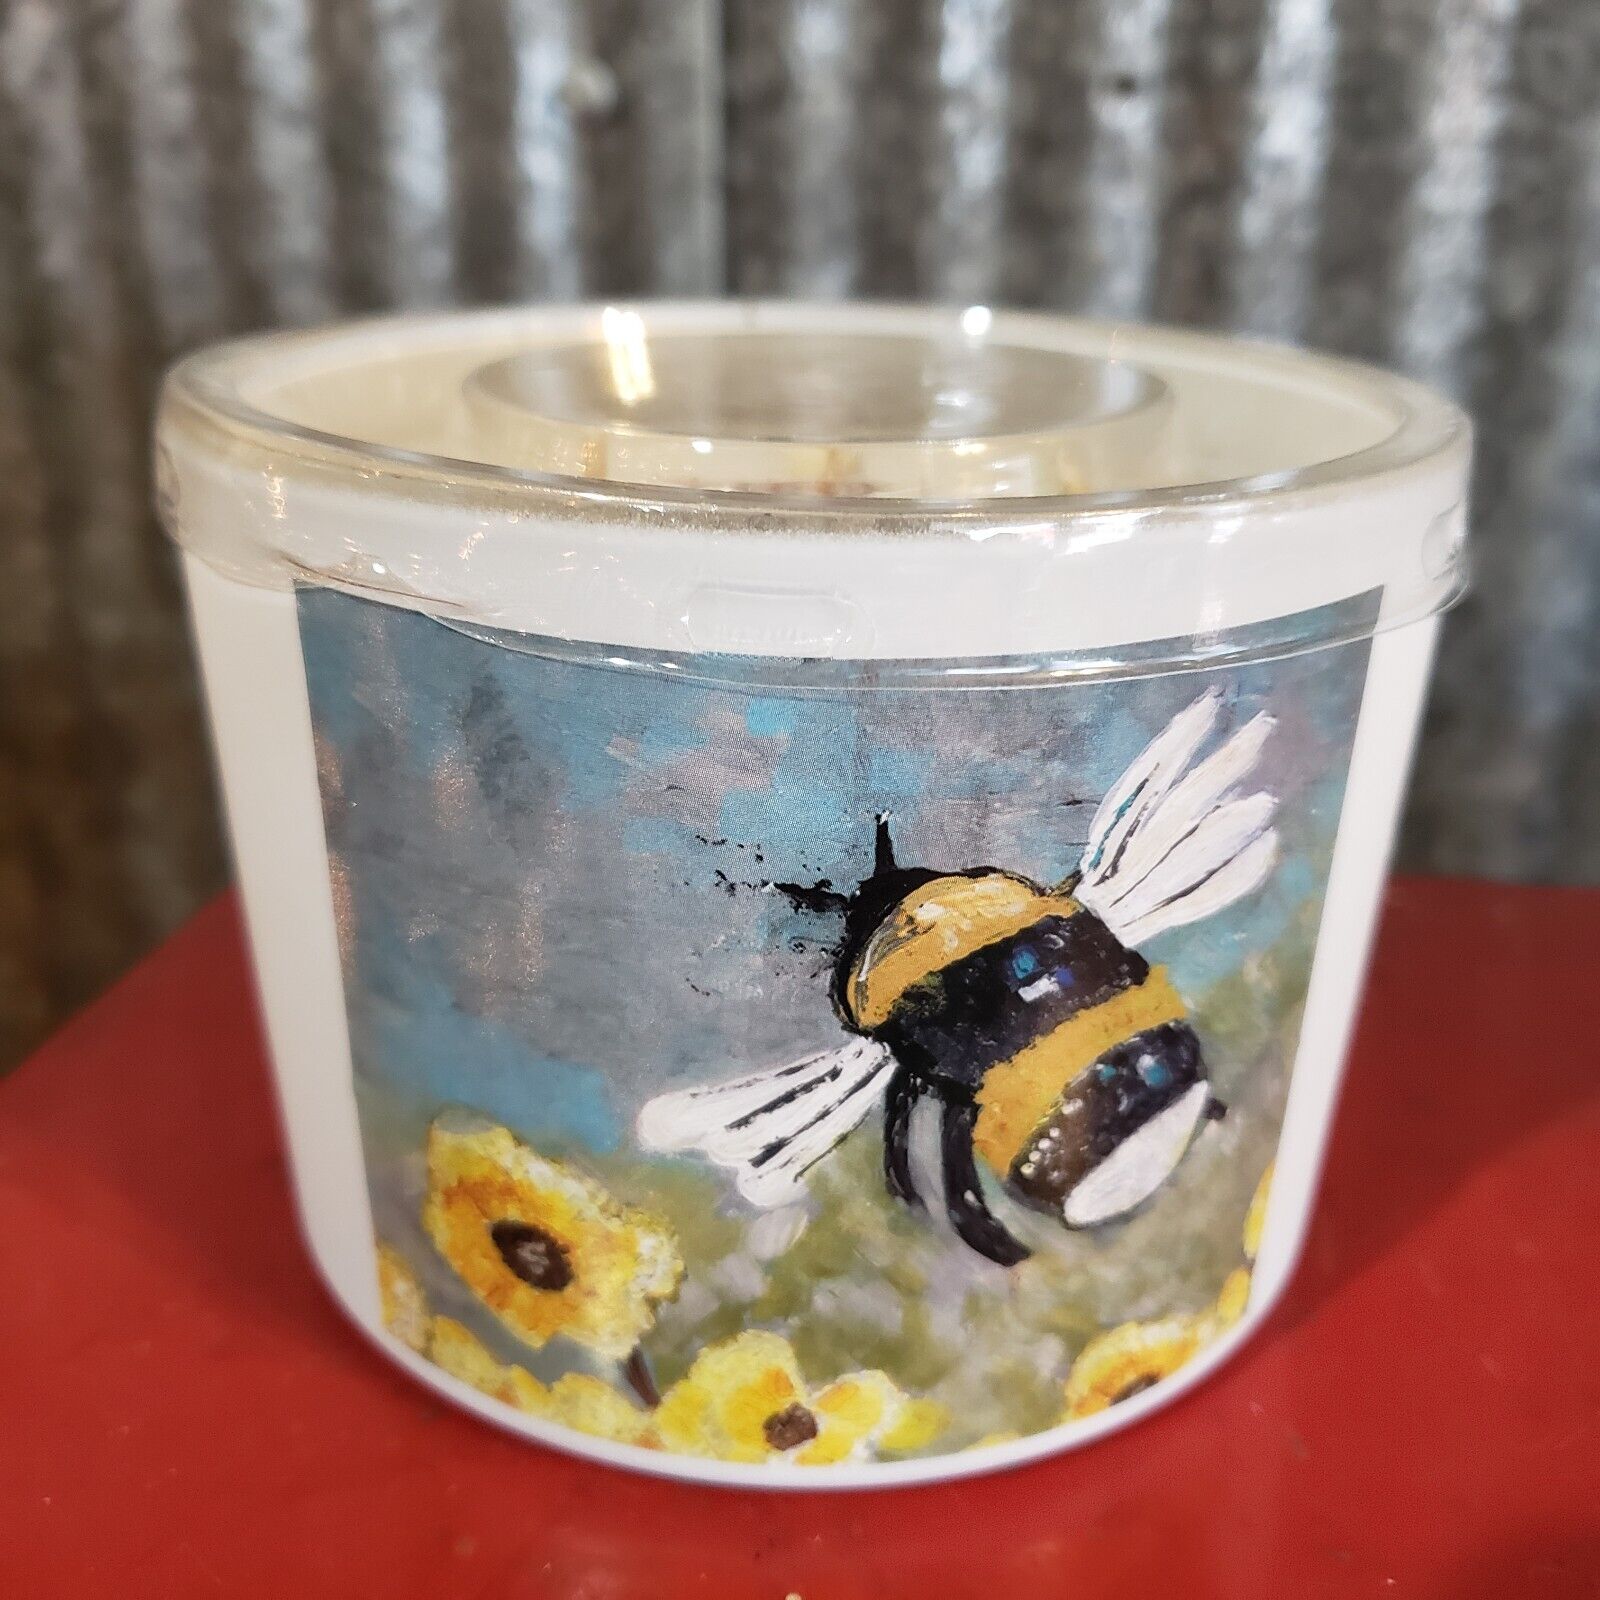 Bumblebee 14 oz Jar Candle LAVENDER Scent - Primitives by Kathy NEW